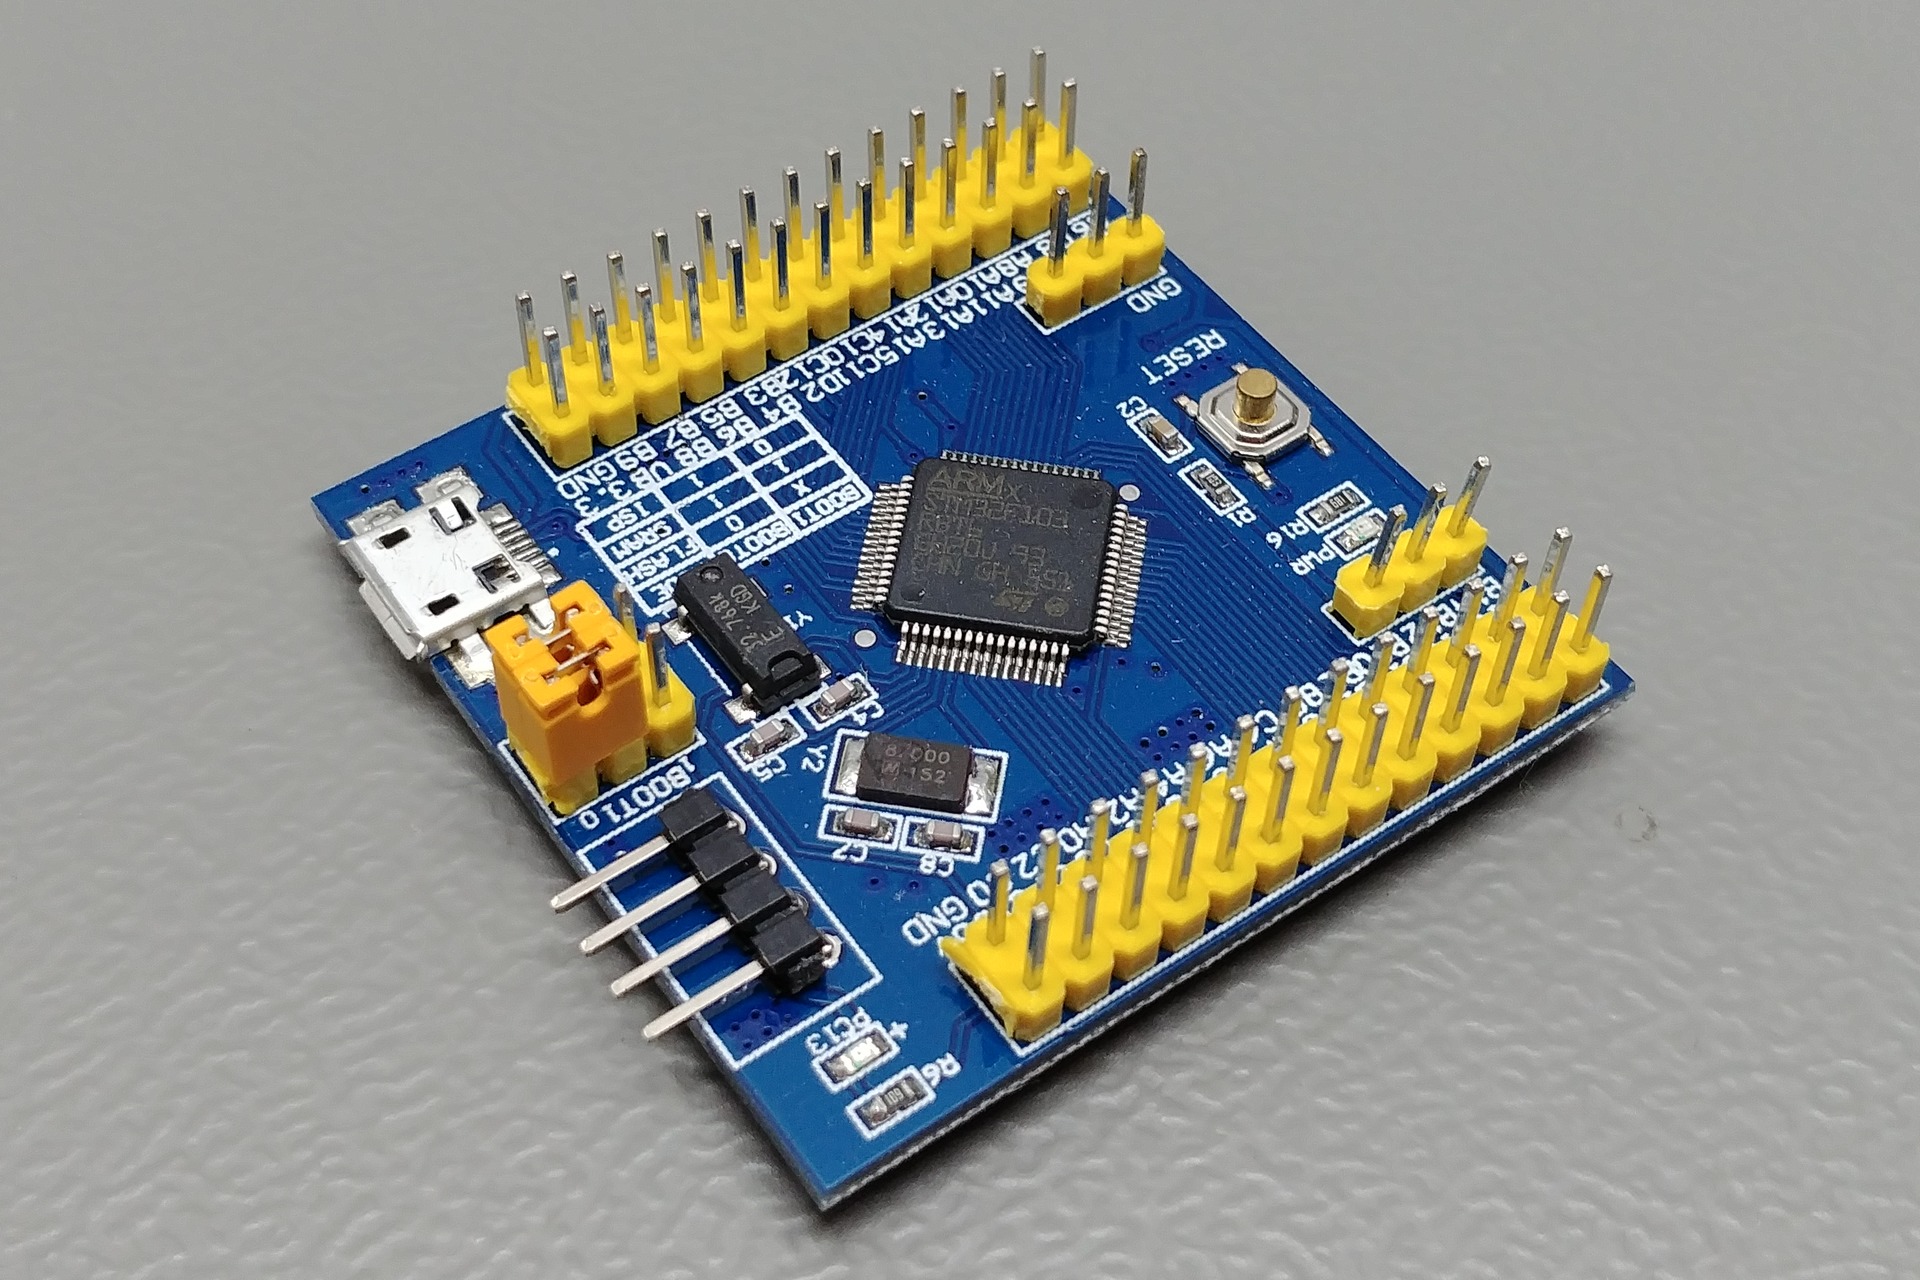 Picture of the vcc-gnd.com STM32F103RBT6